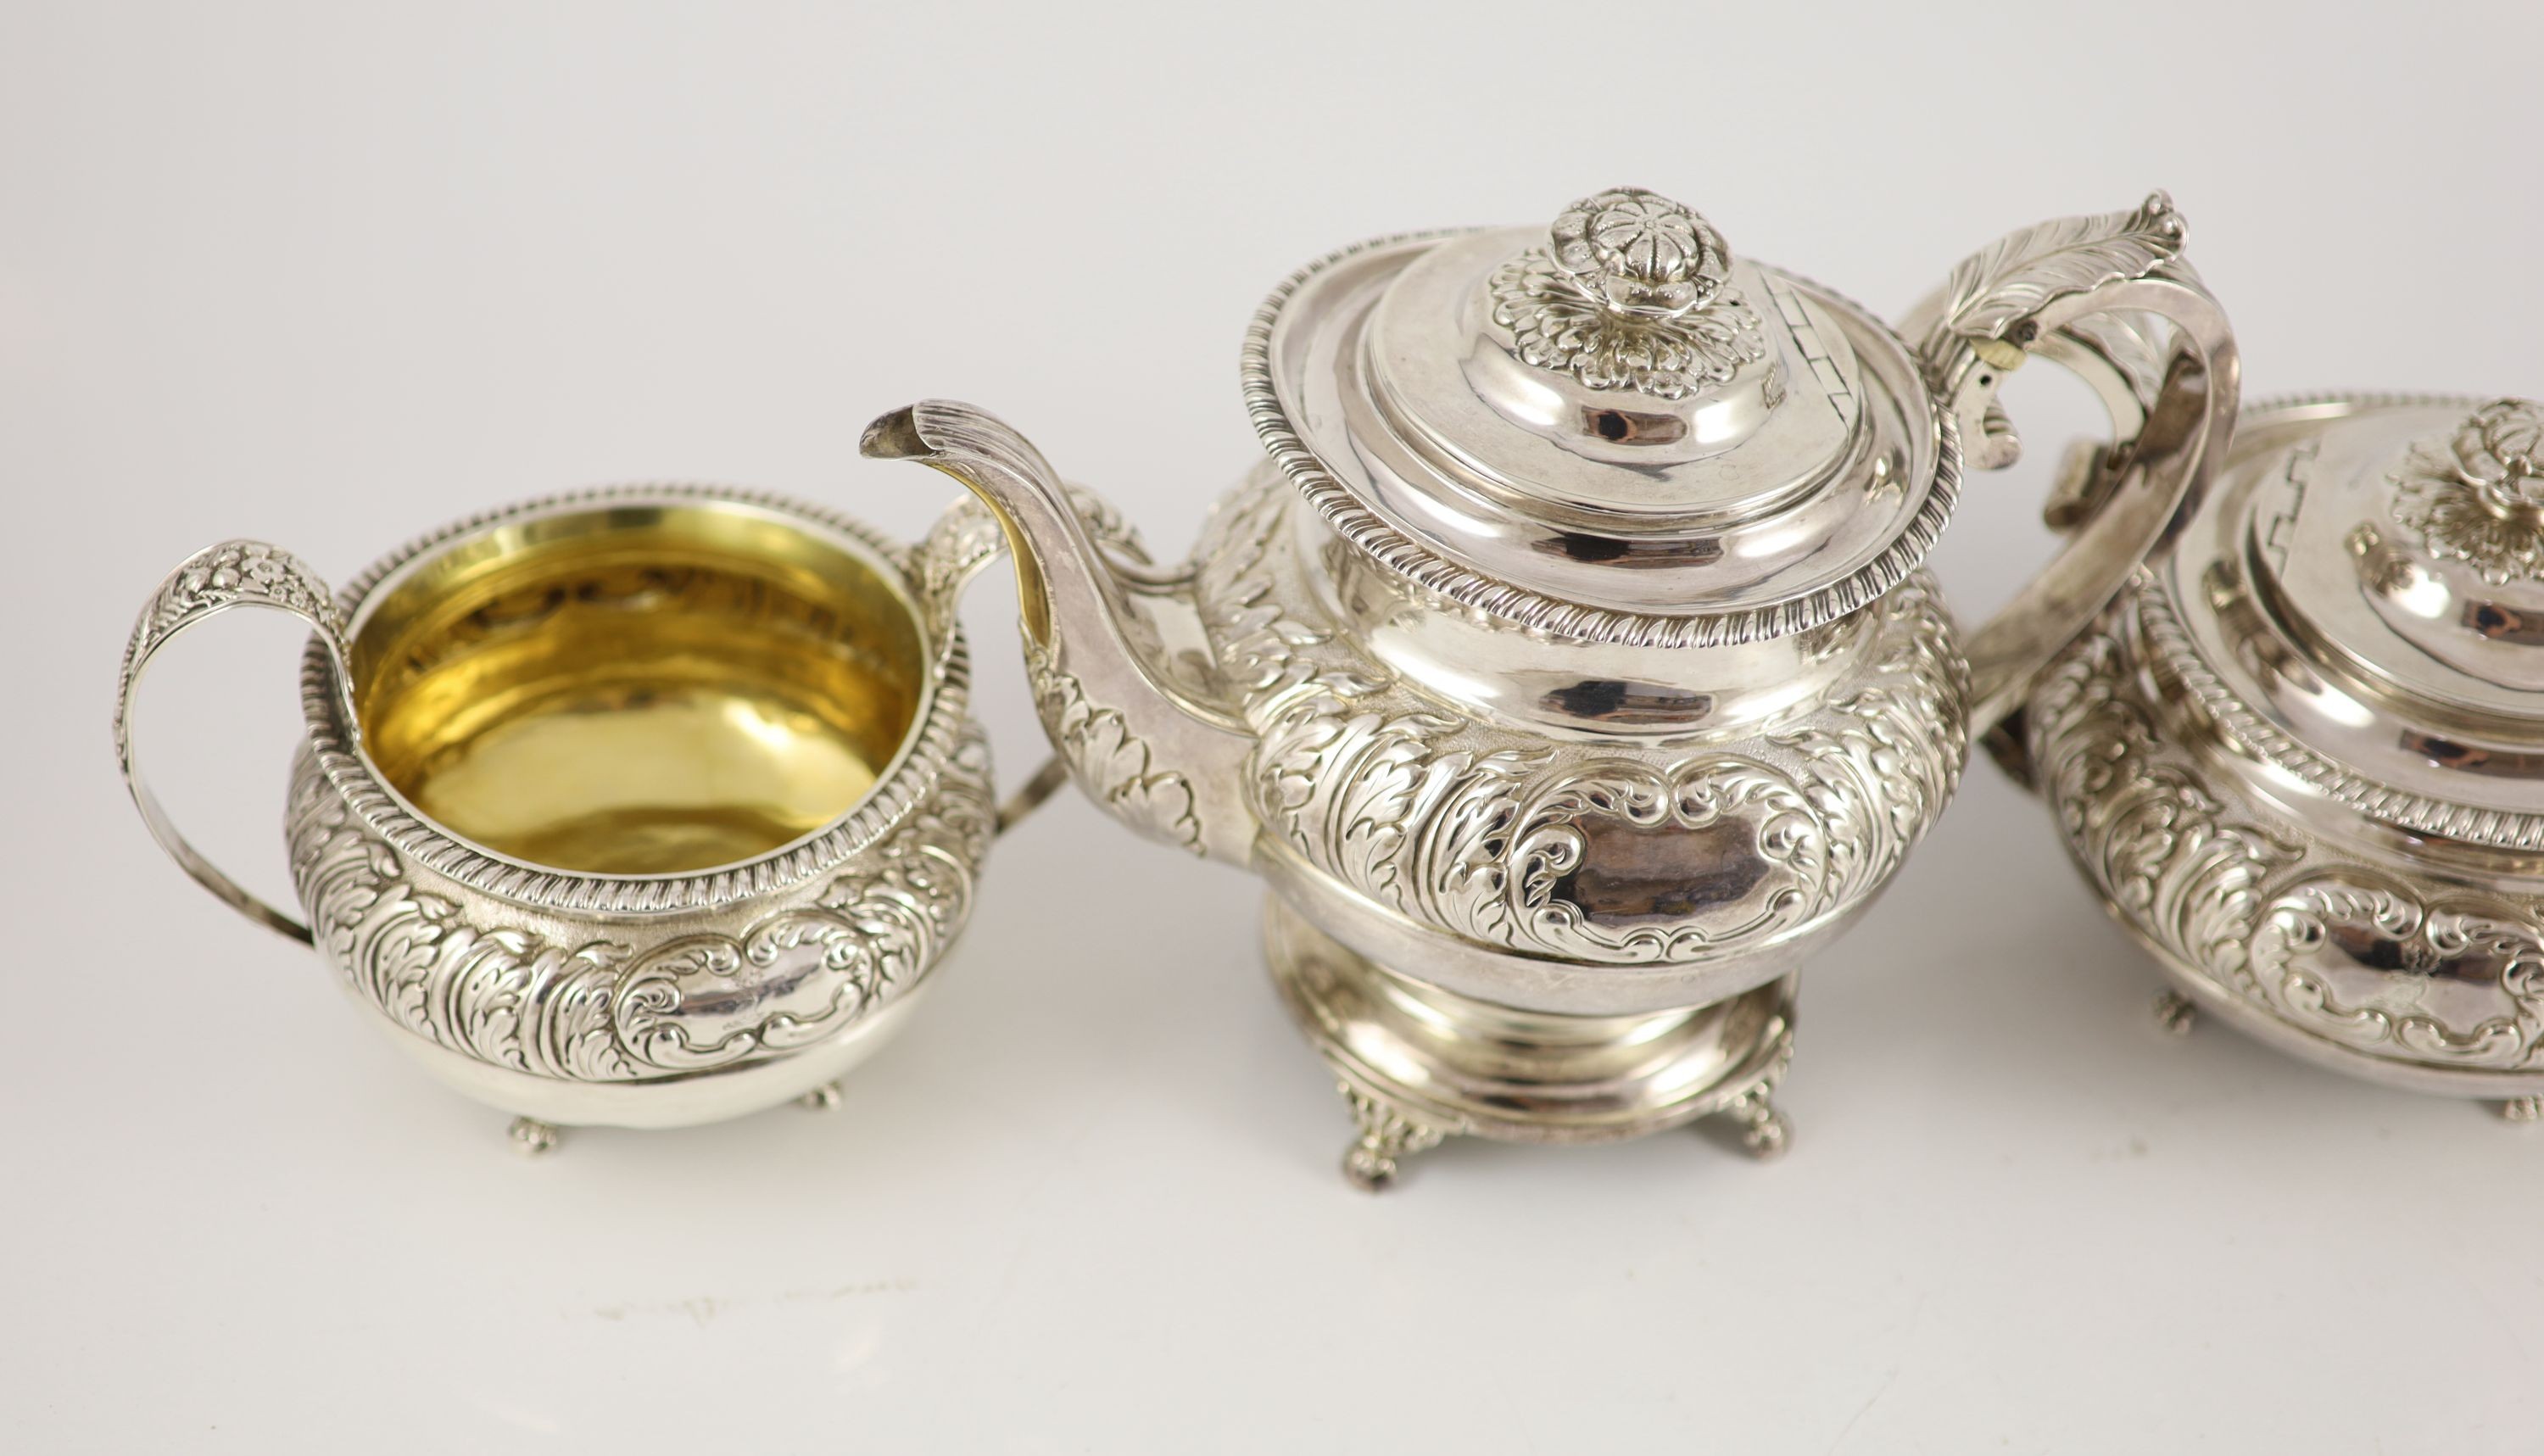 A George IV provincial silver three piece tea set by Barber & Whitwell, York, 1821 and a similar silver coffee pot, by Richard Pearce?, London, 1820